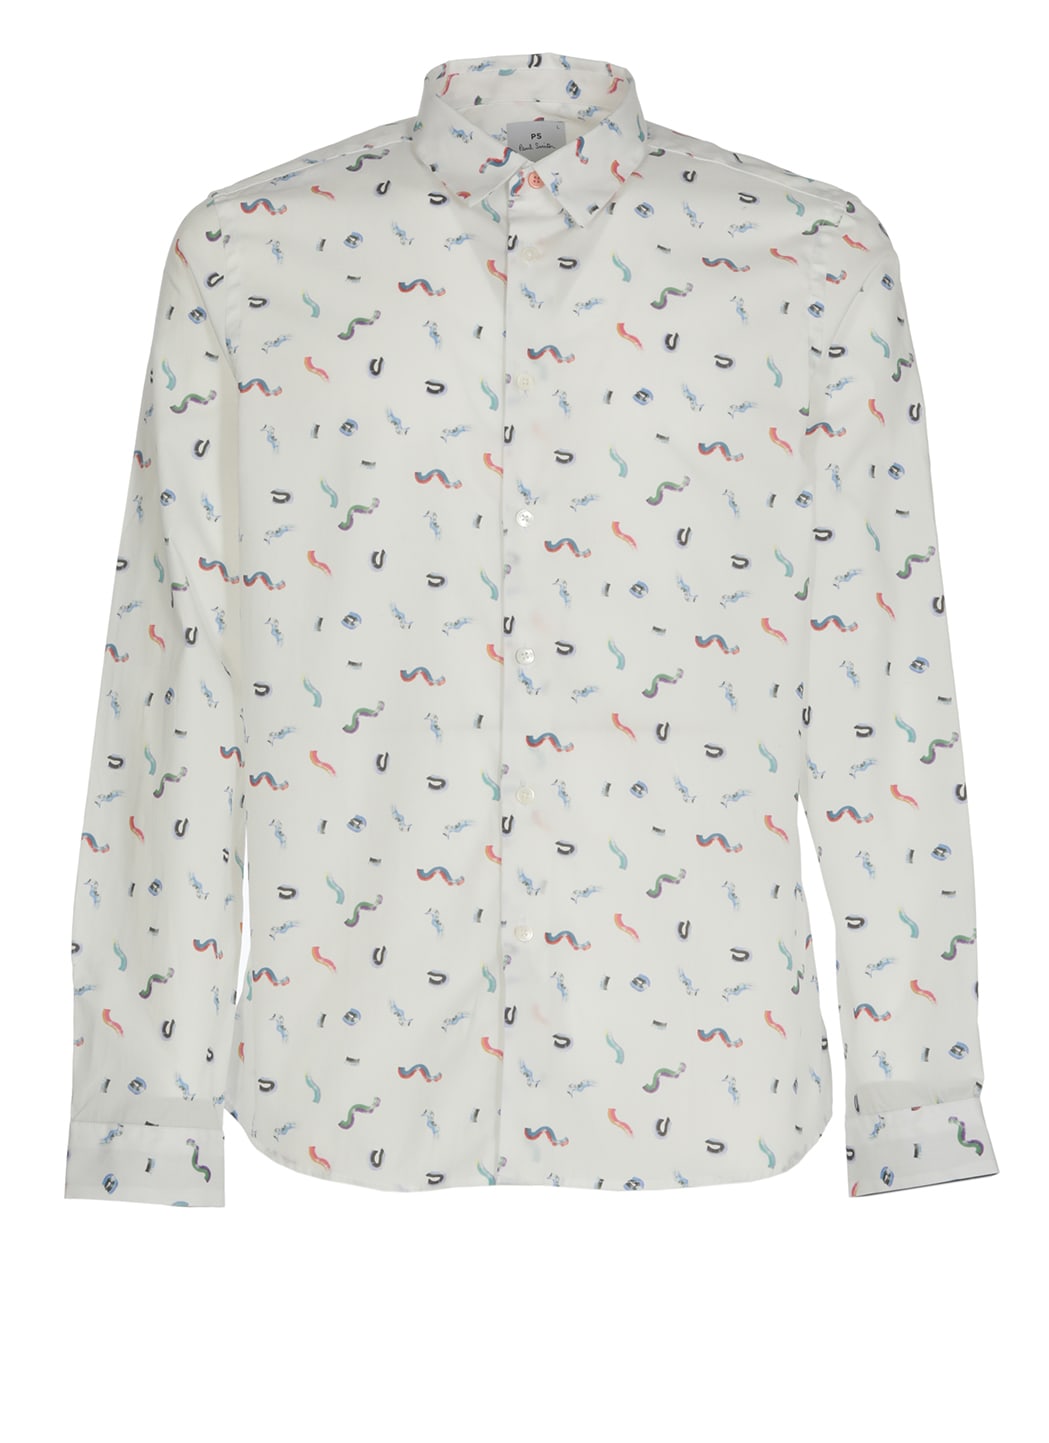 PS by Paul Smith Cotton Shirt